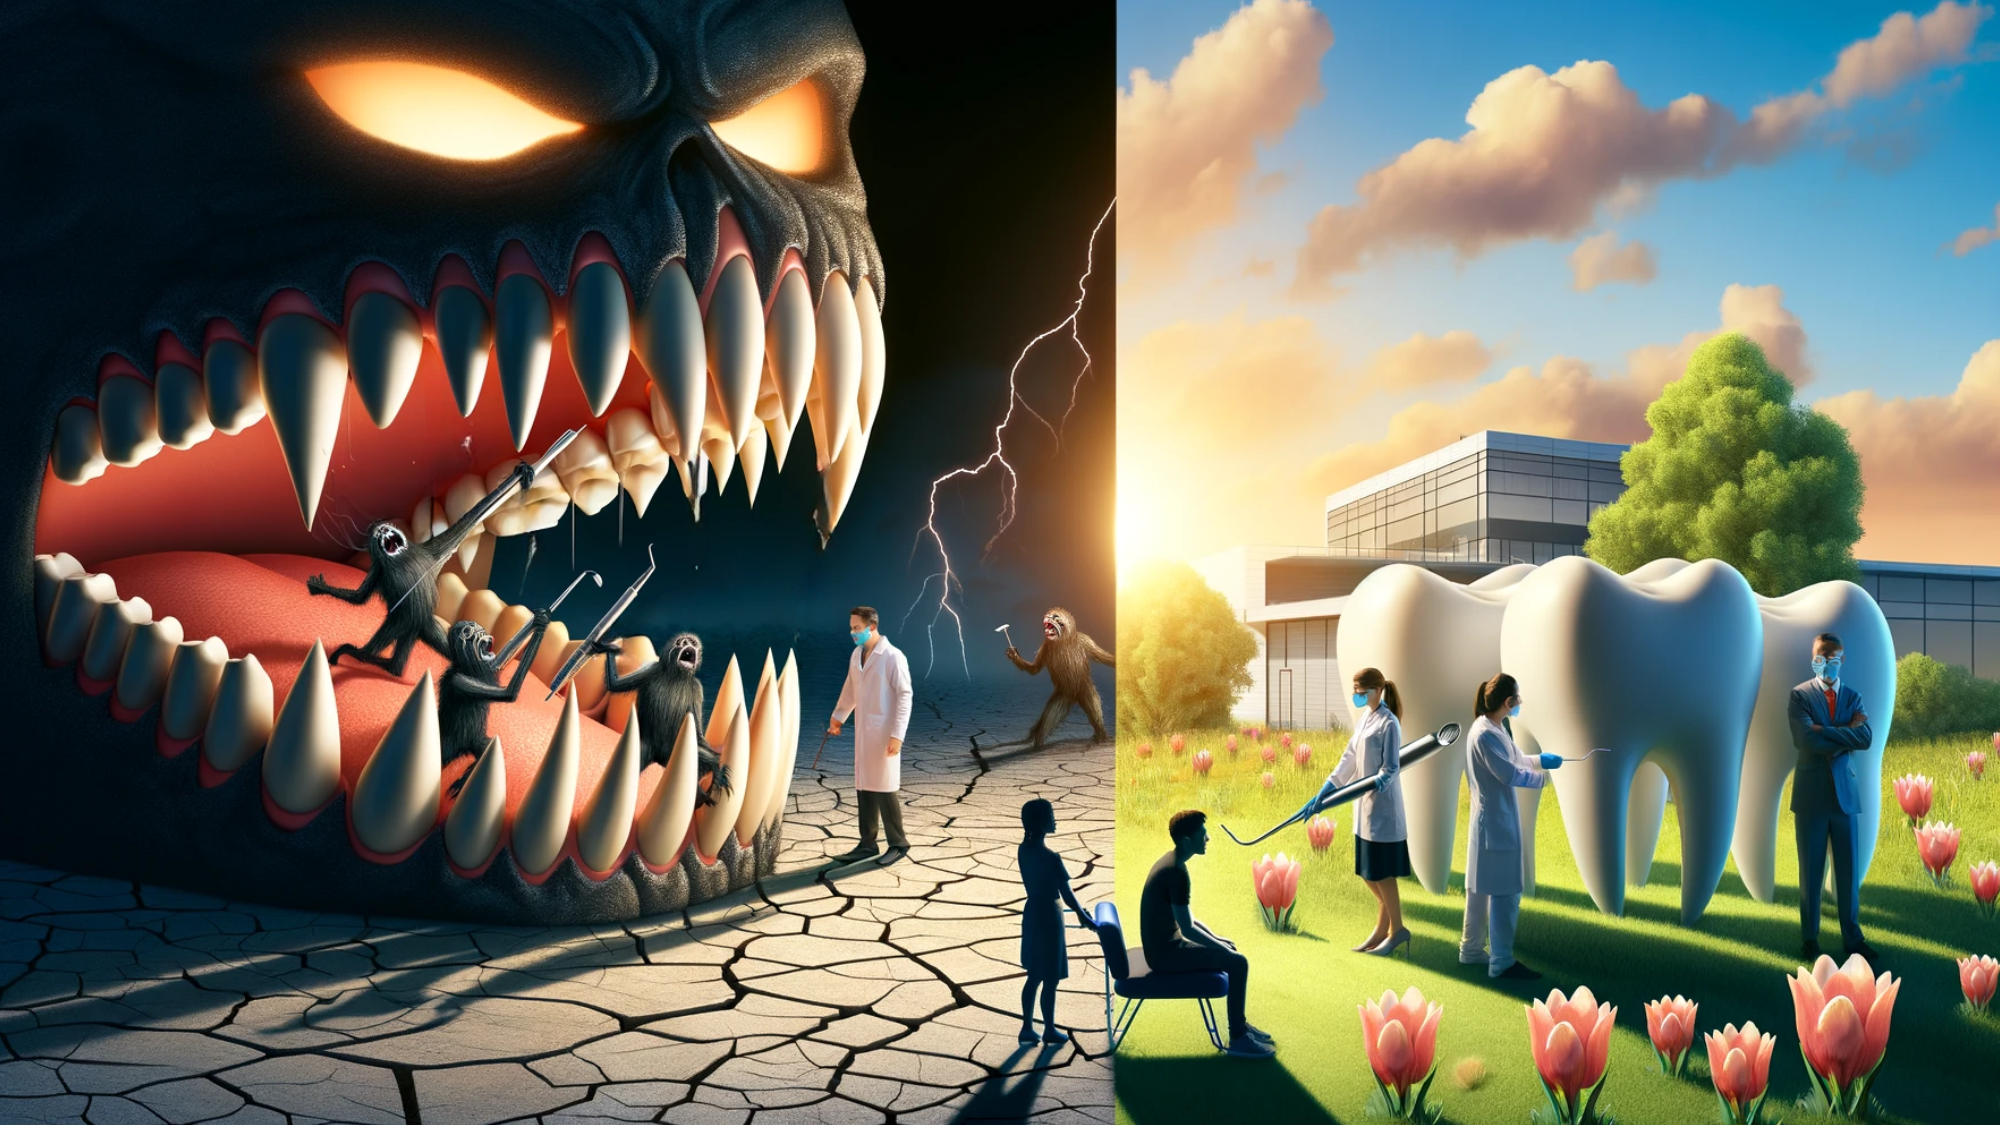 "Art split between a scary dental tool landscape and a sunny scene with dentists and smiling patients.